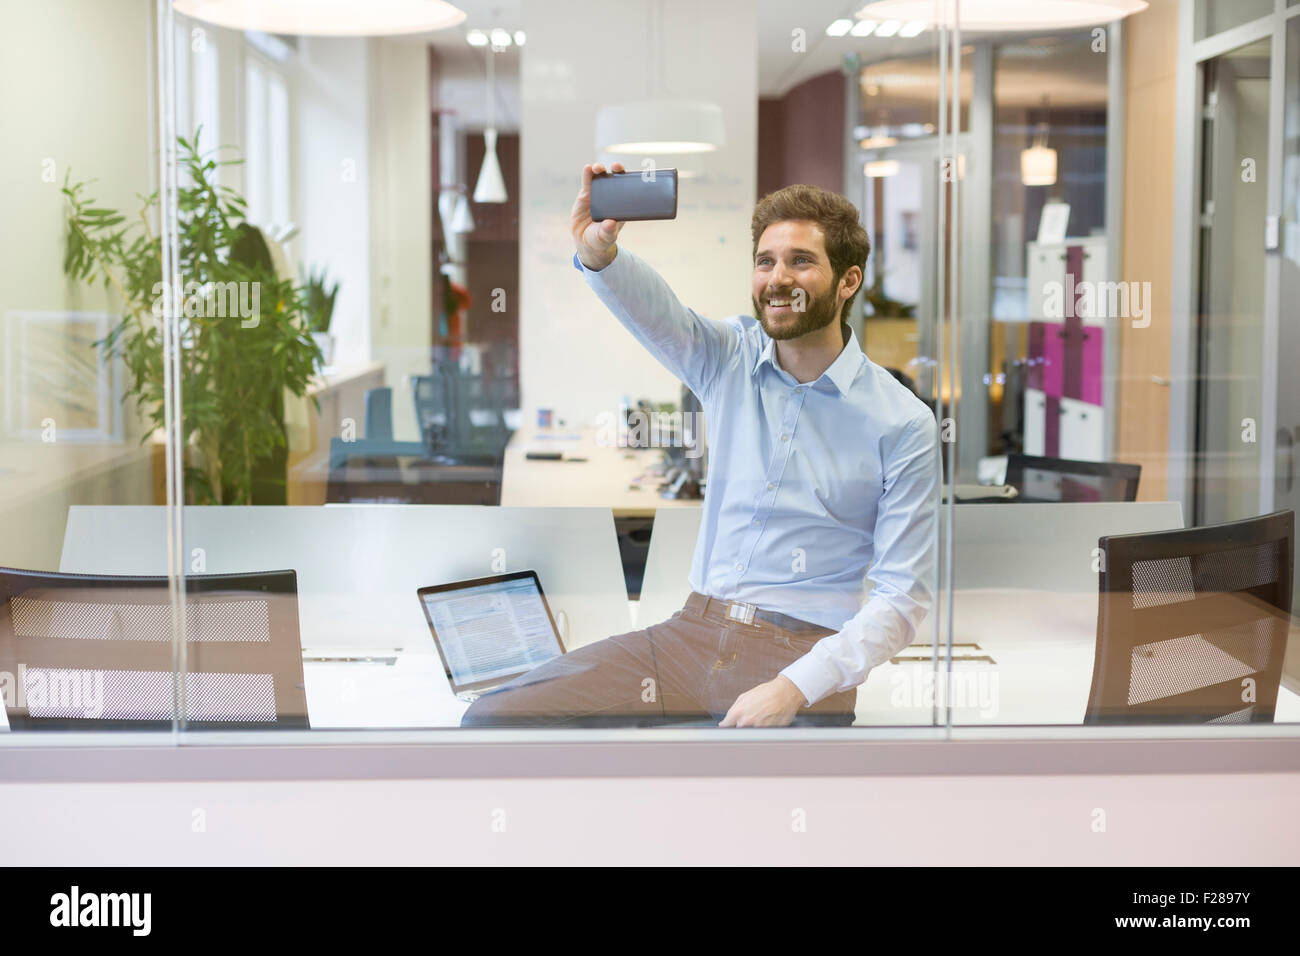 Selfie casual businessman taking pictures in open space office Stock Photo